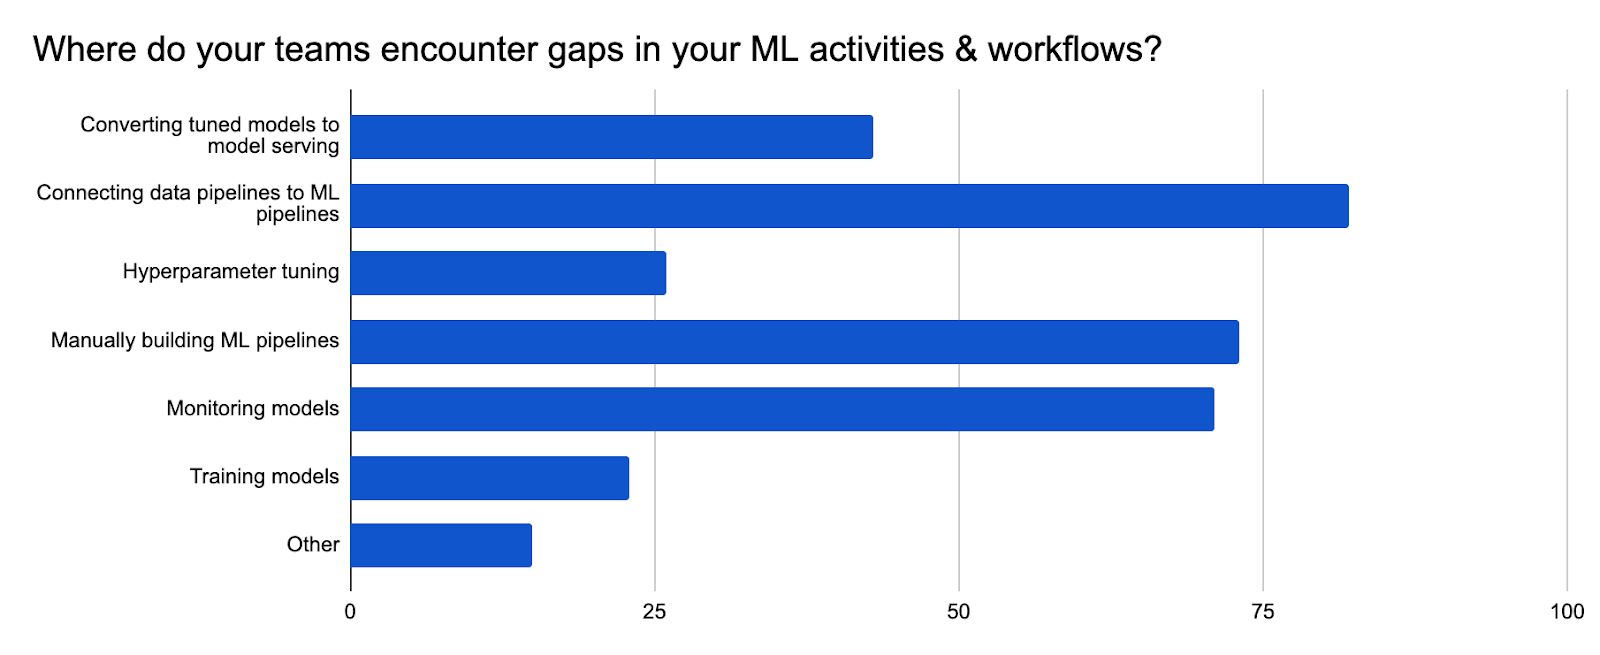 2021 survey - gaps in ML activities and workflow